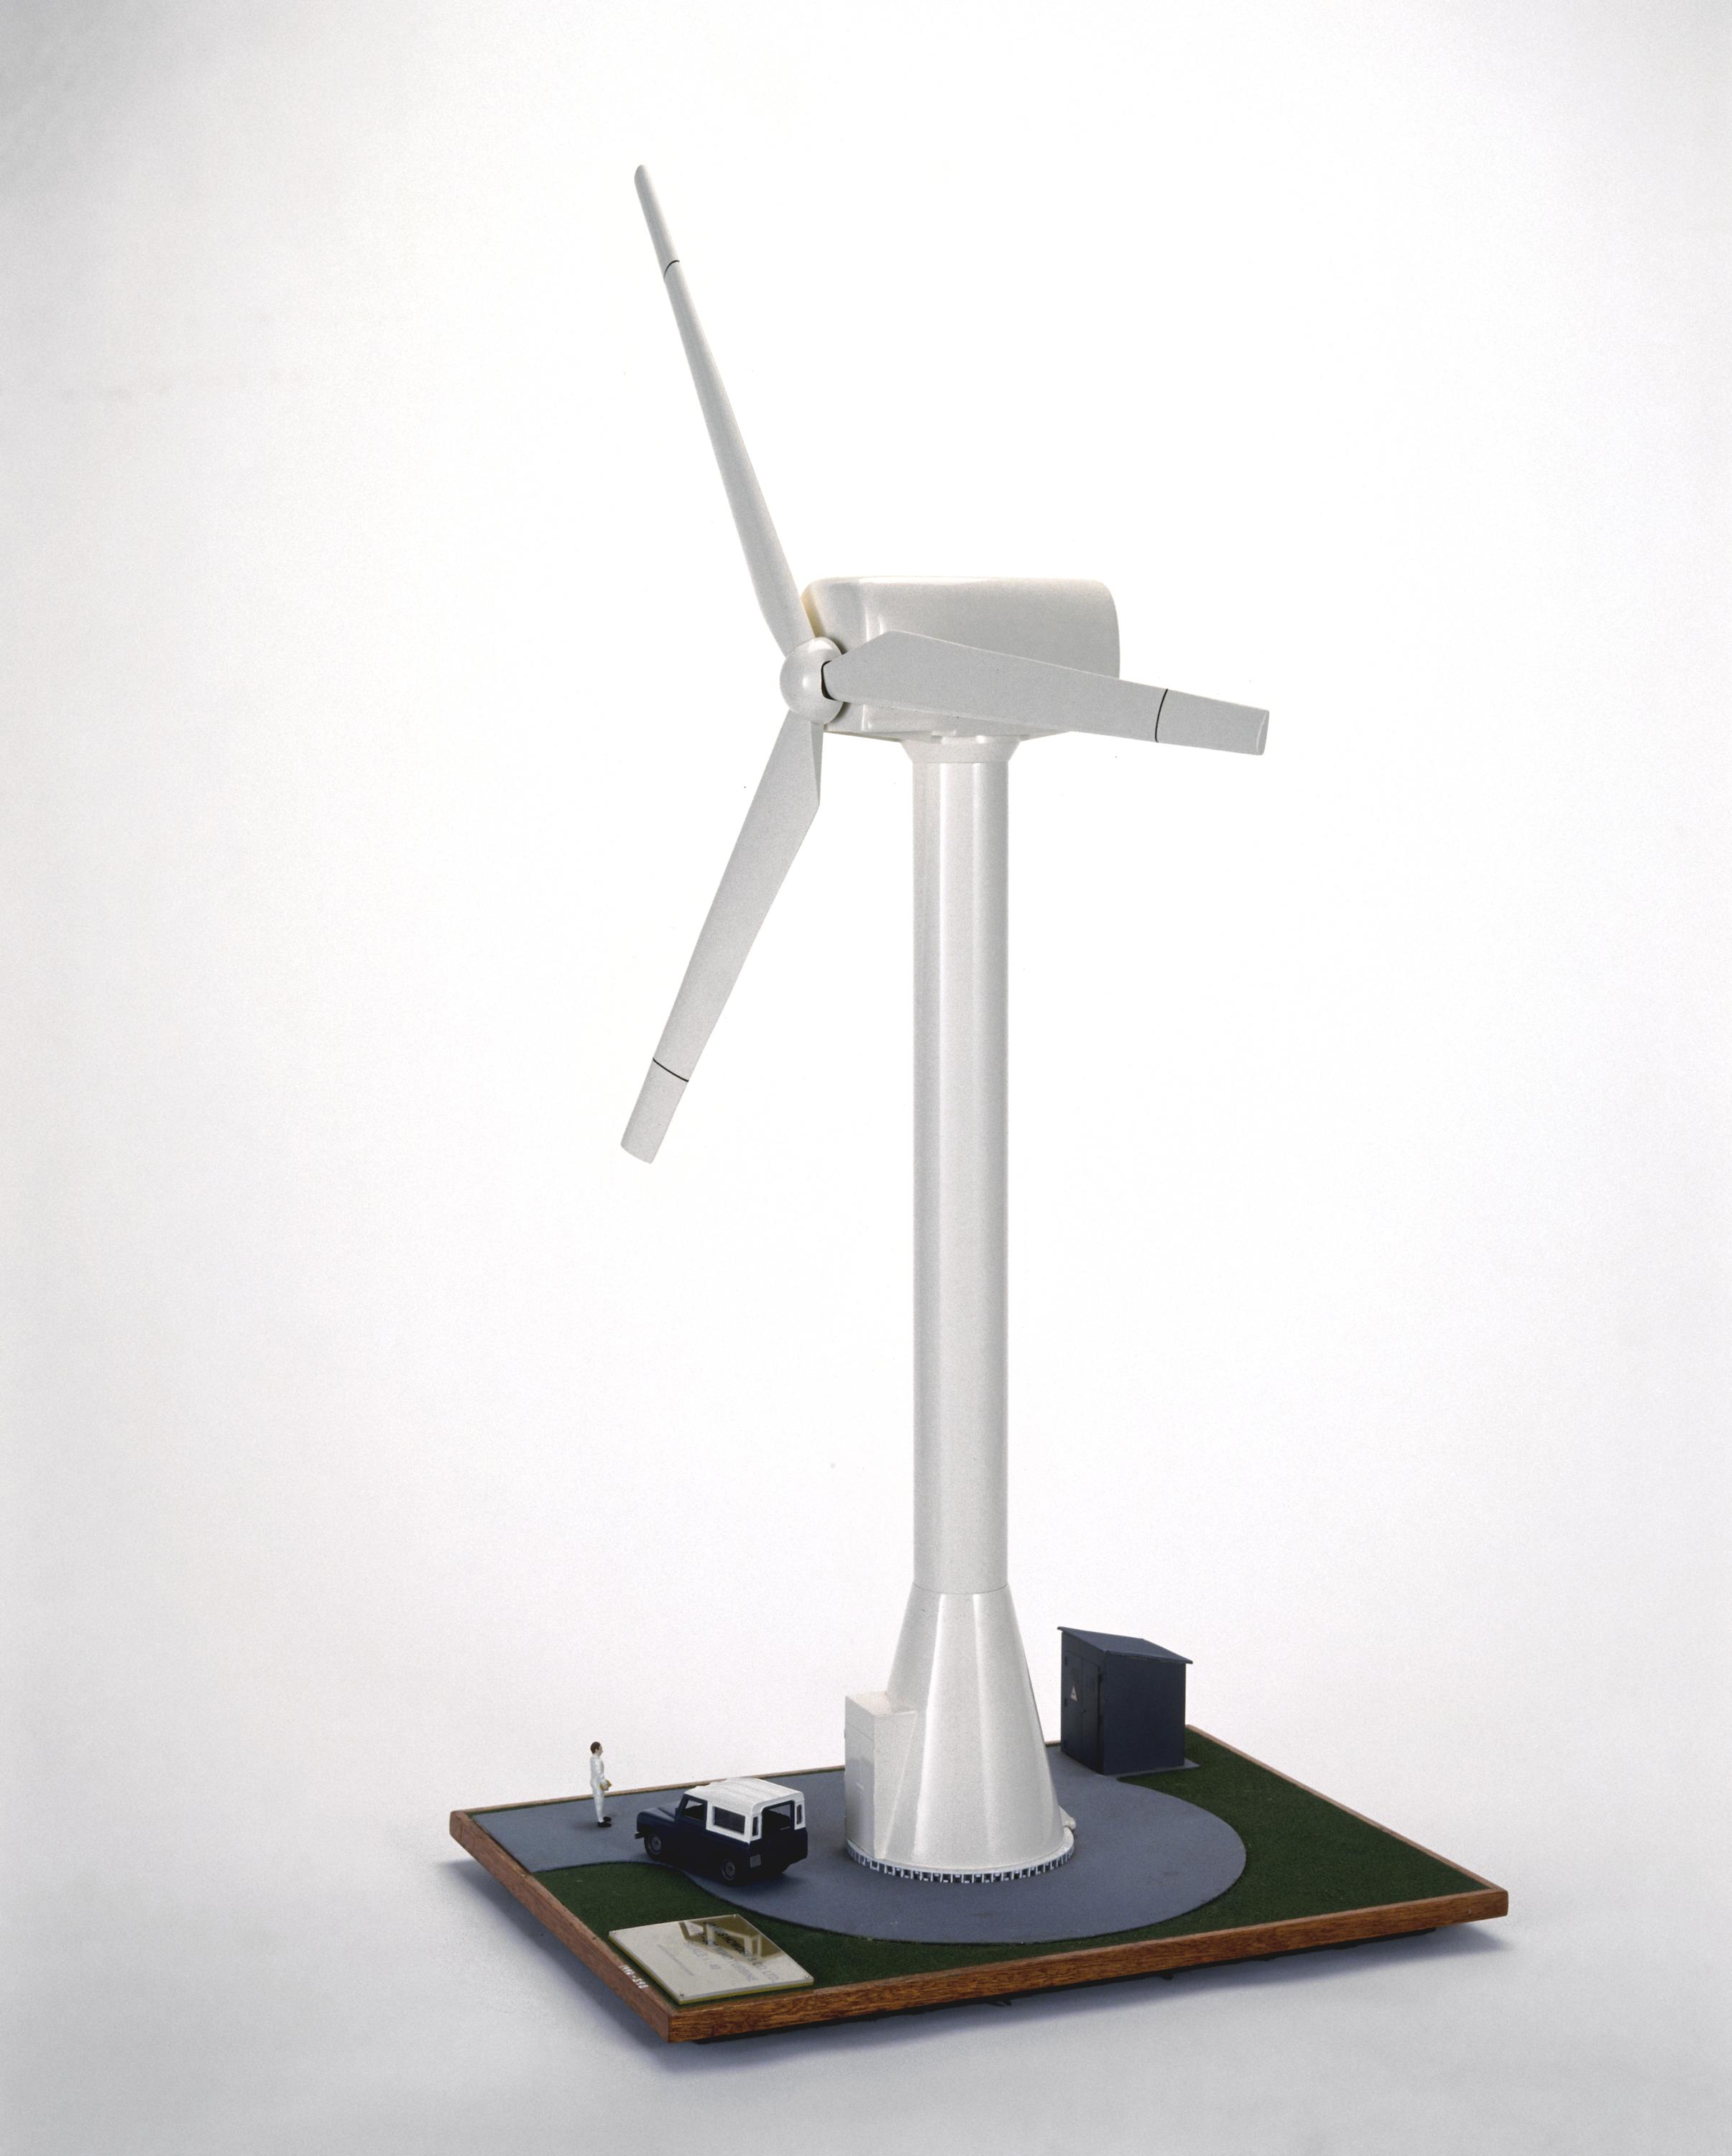 1:40 model of a Howden HWP 300 wind turbine by Angus Model Makers